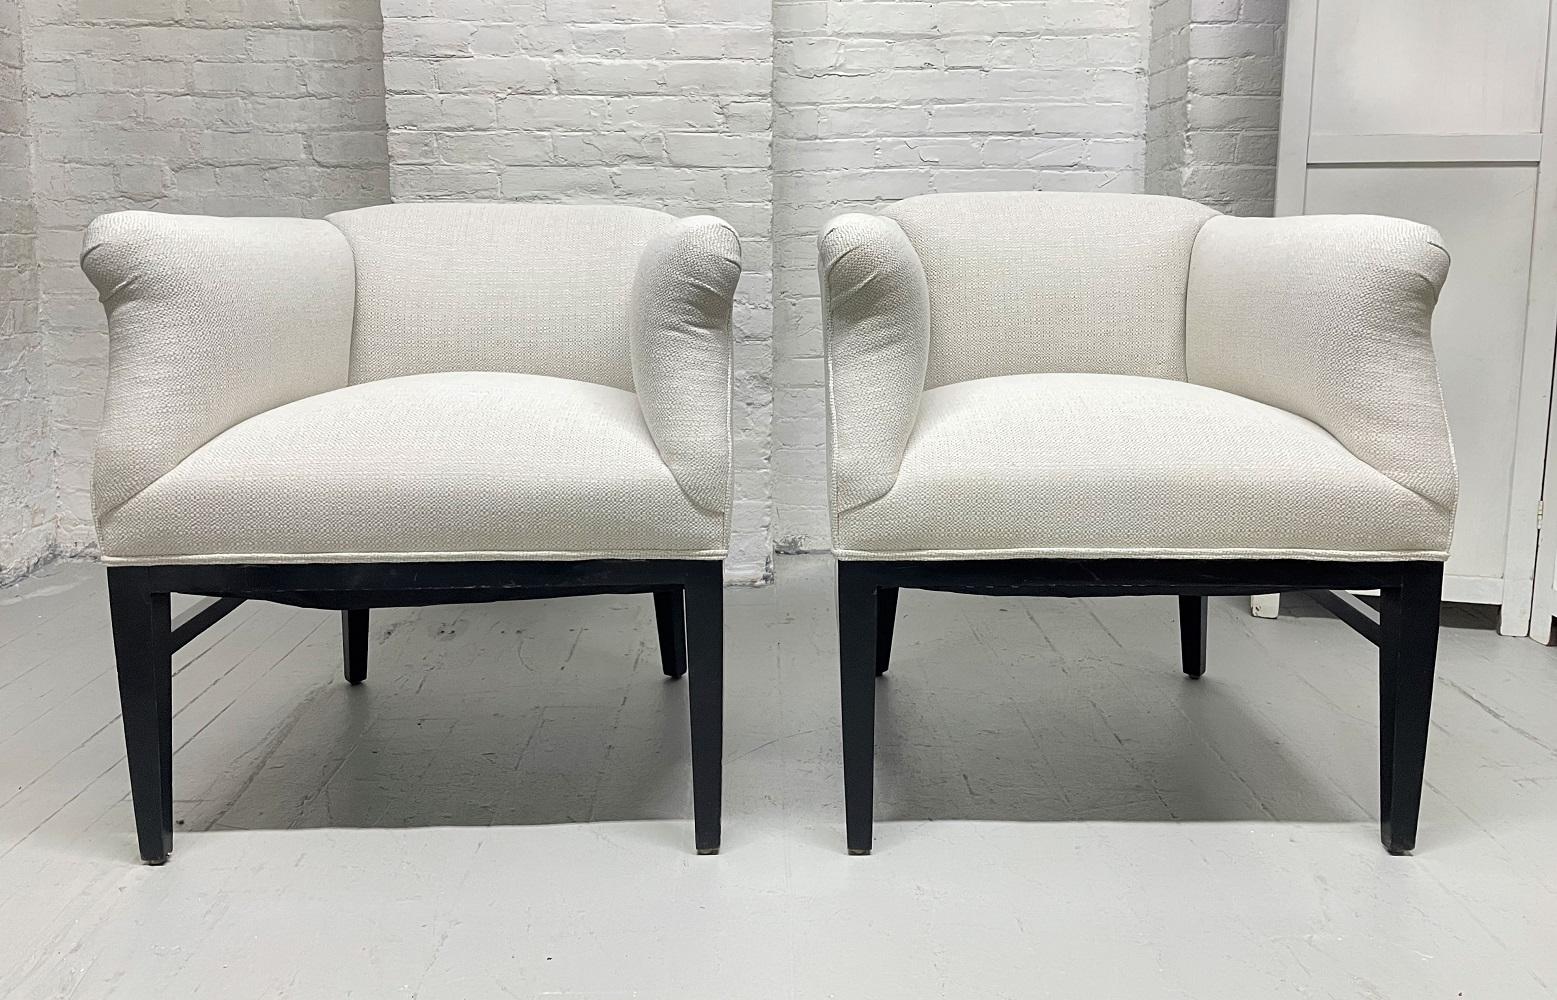 Pair of 1940s Art Deco lounge chairs. Newly upholstered with a black lacquered wood frame.